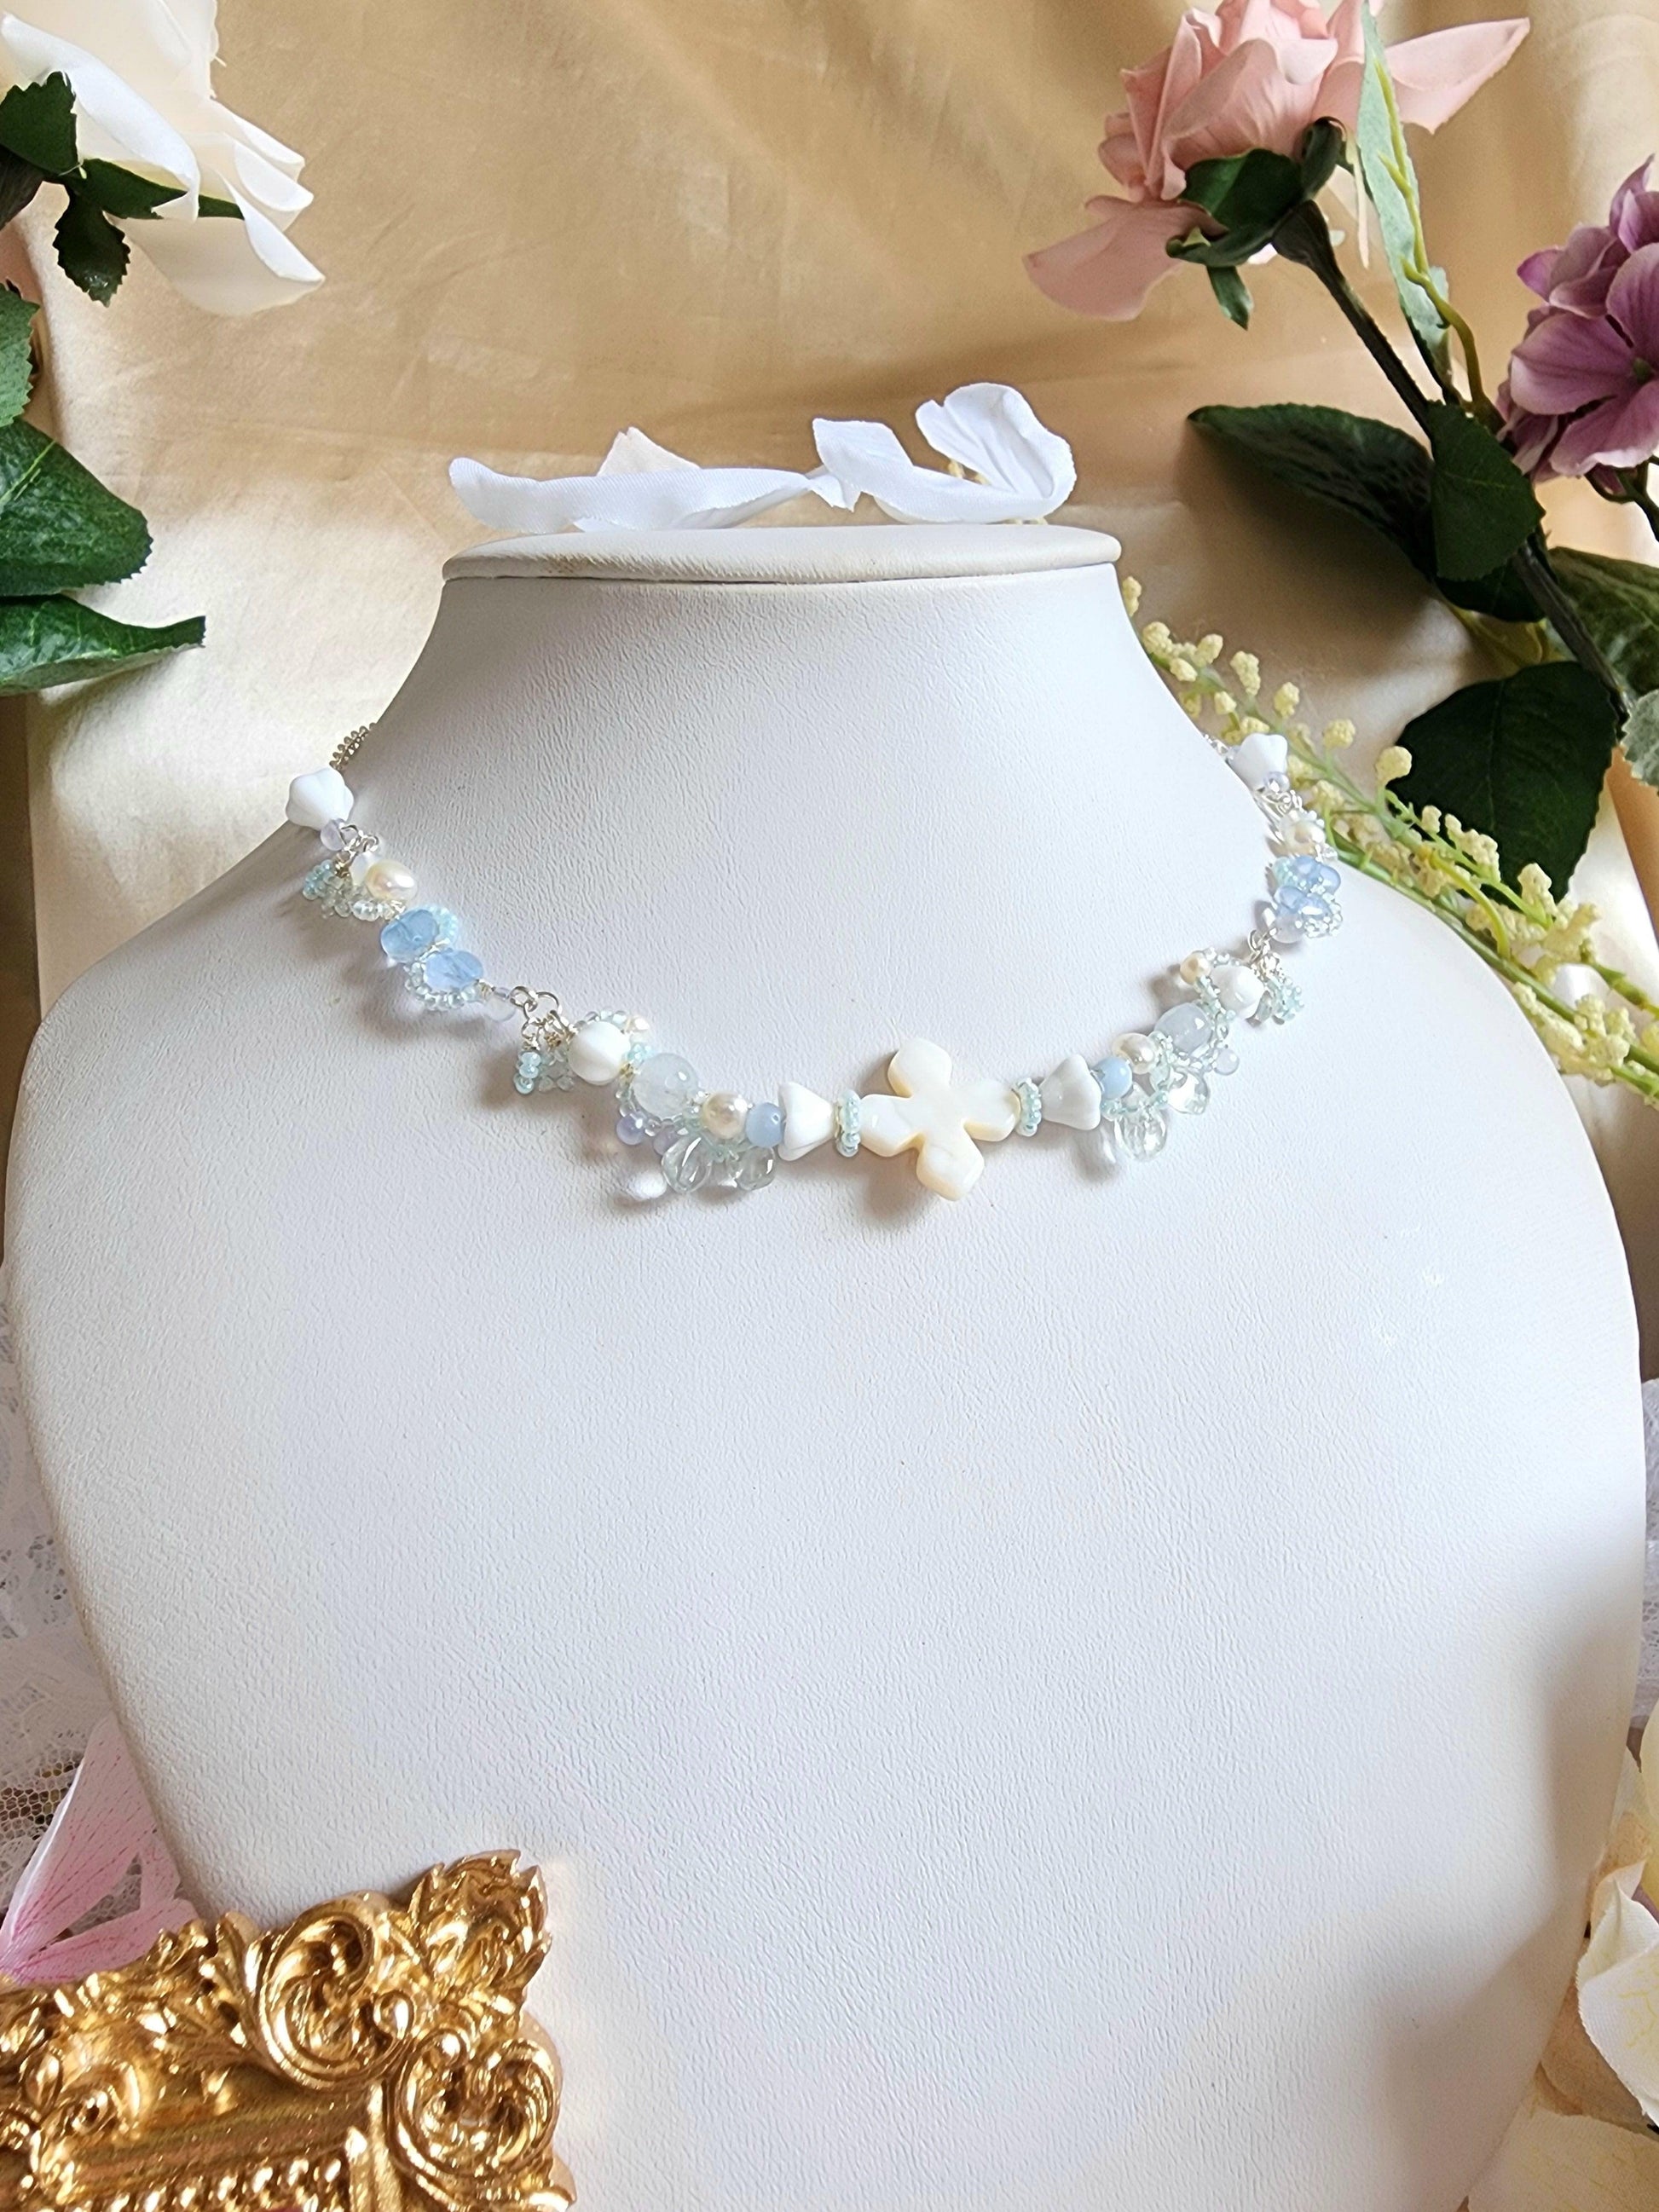 The Knights of the Sky are an esteemed class that traverse the skies, their silhouettes framed by the backdrop of white-tinted, petal-laden clouds. This handcrafted necklace is constructed with a shell centerpiece, vintage glass beads, Czech glass beads, freshwater pearls, and silver-plated accents.